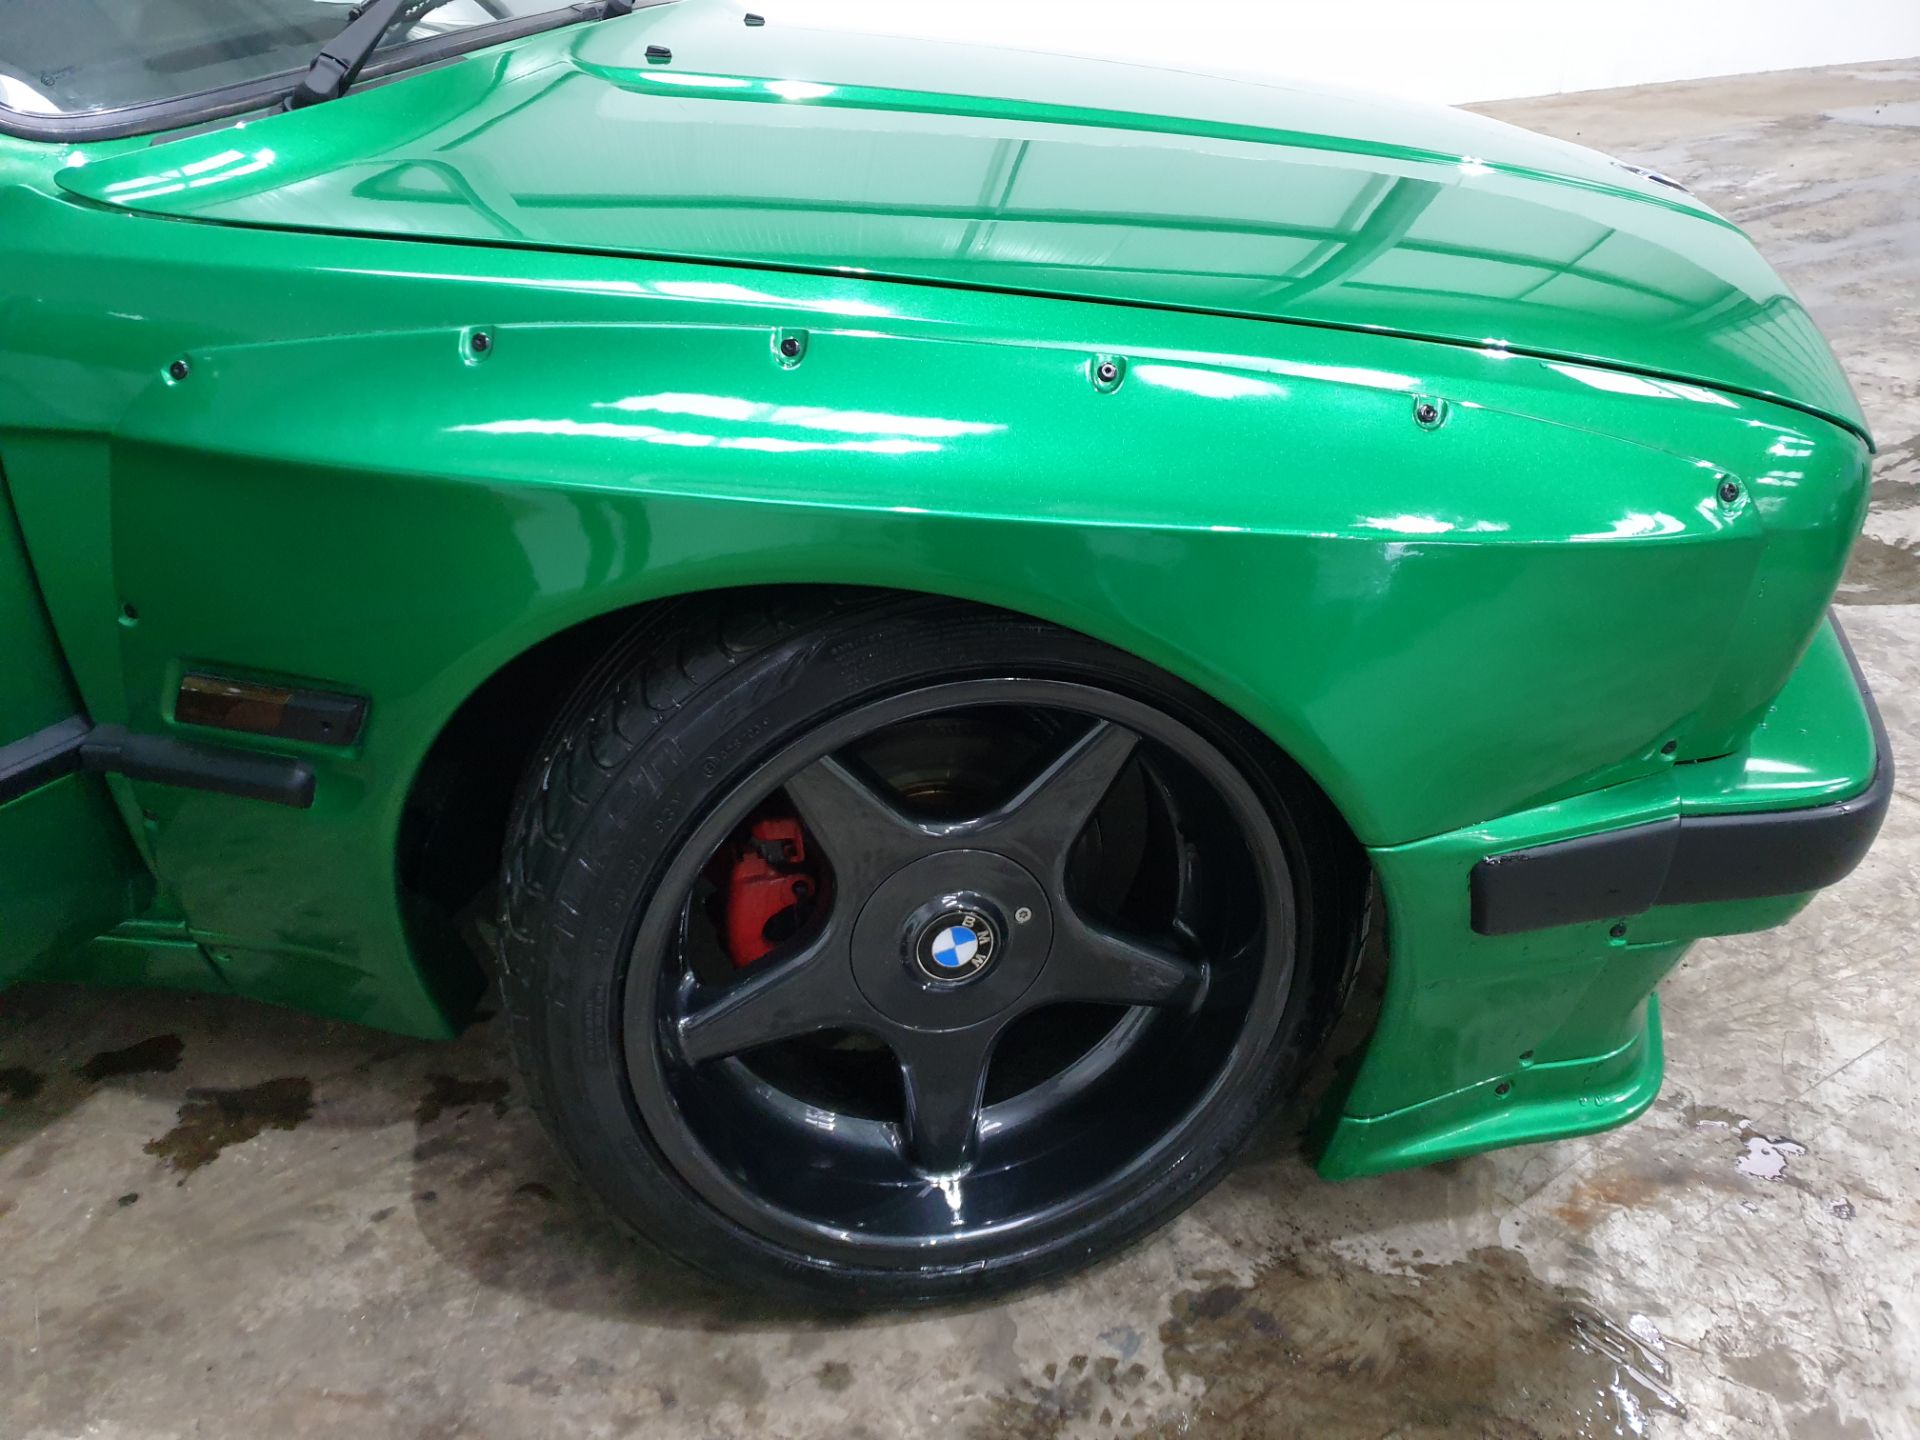 BMW 3 serires with 2.8 engine and loads of mods - Image 17 of 21